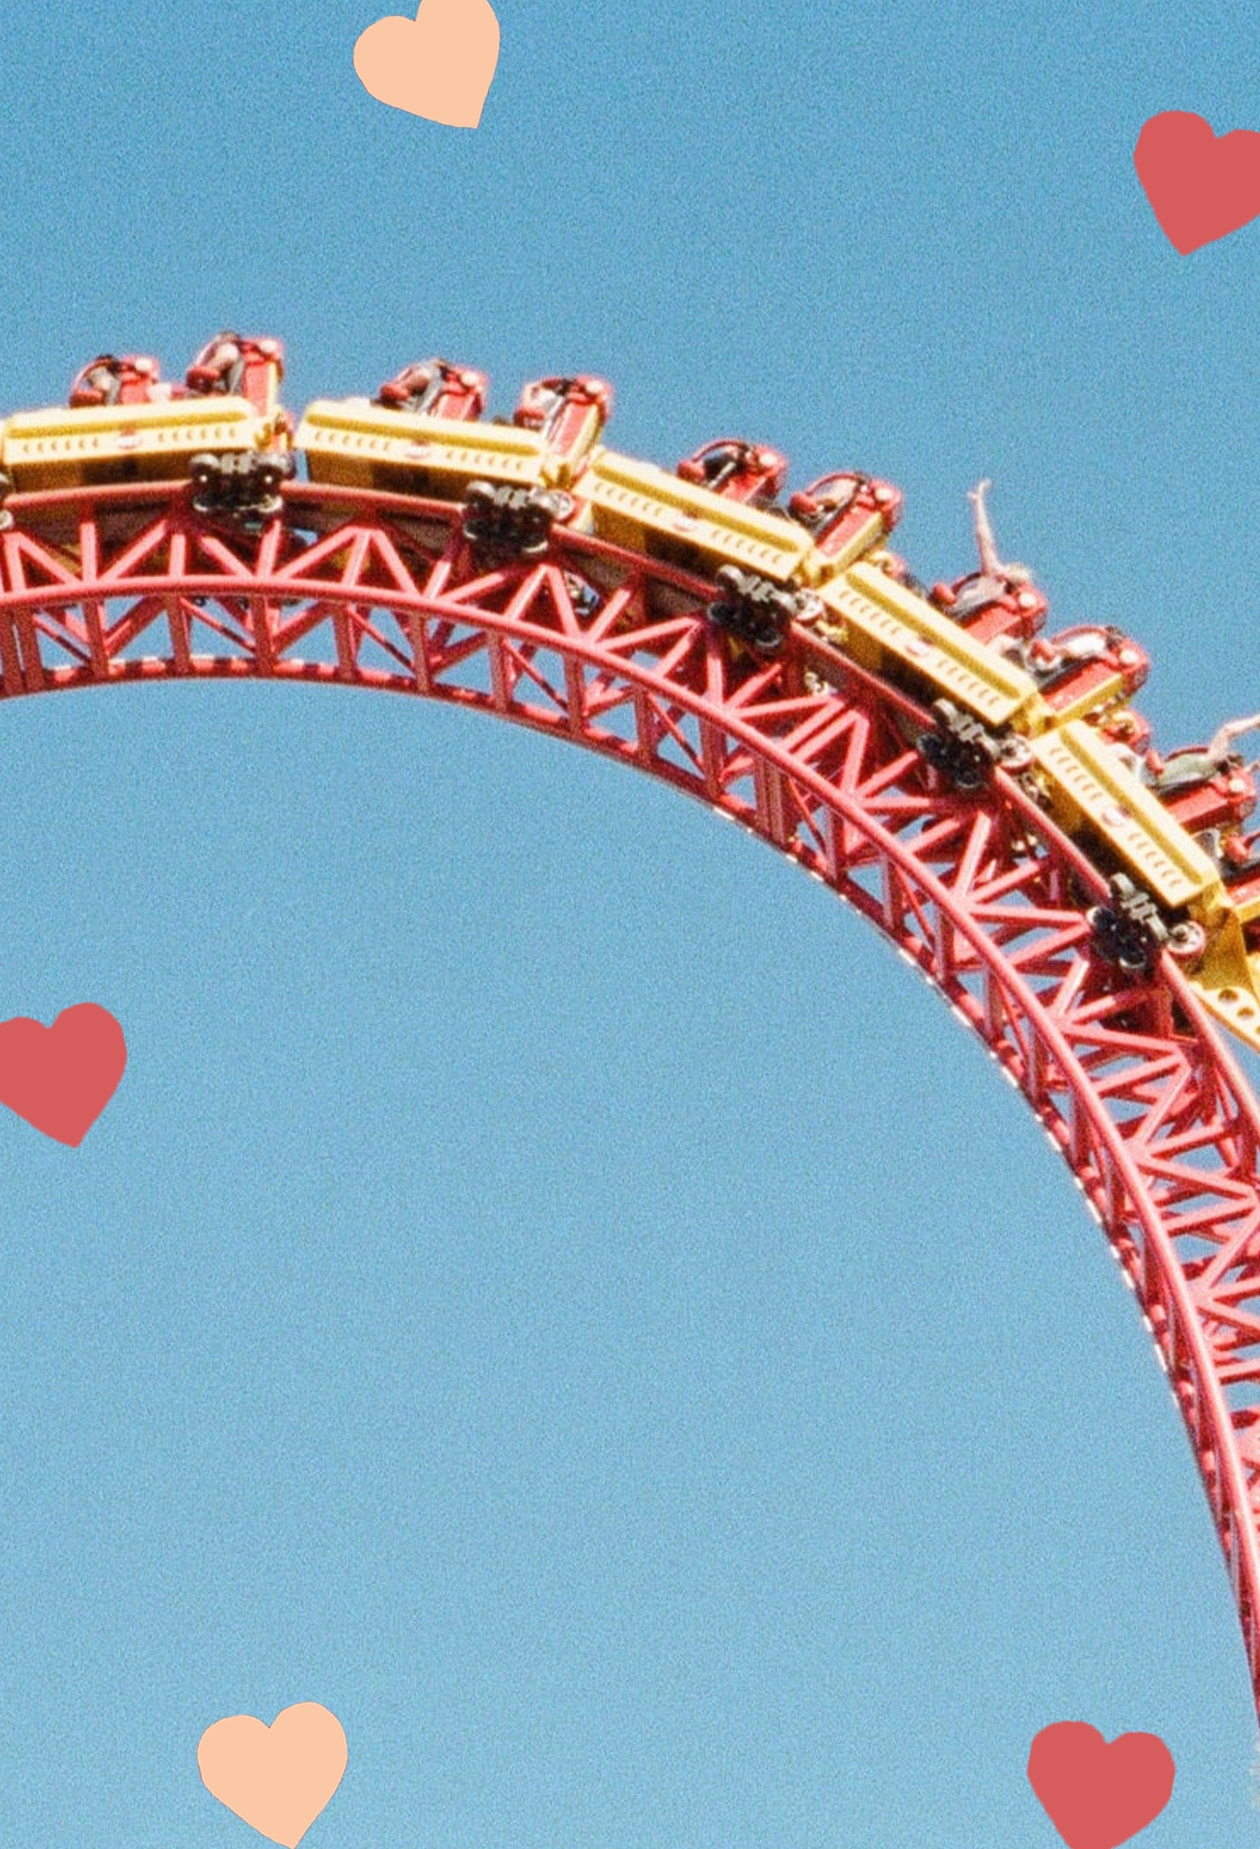 shot of gold coast rollercoaster, in red and yellow, against blue sky. people sit in it with their arms up. scattered hearts decorate the image.